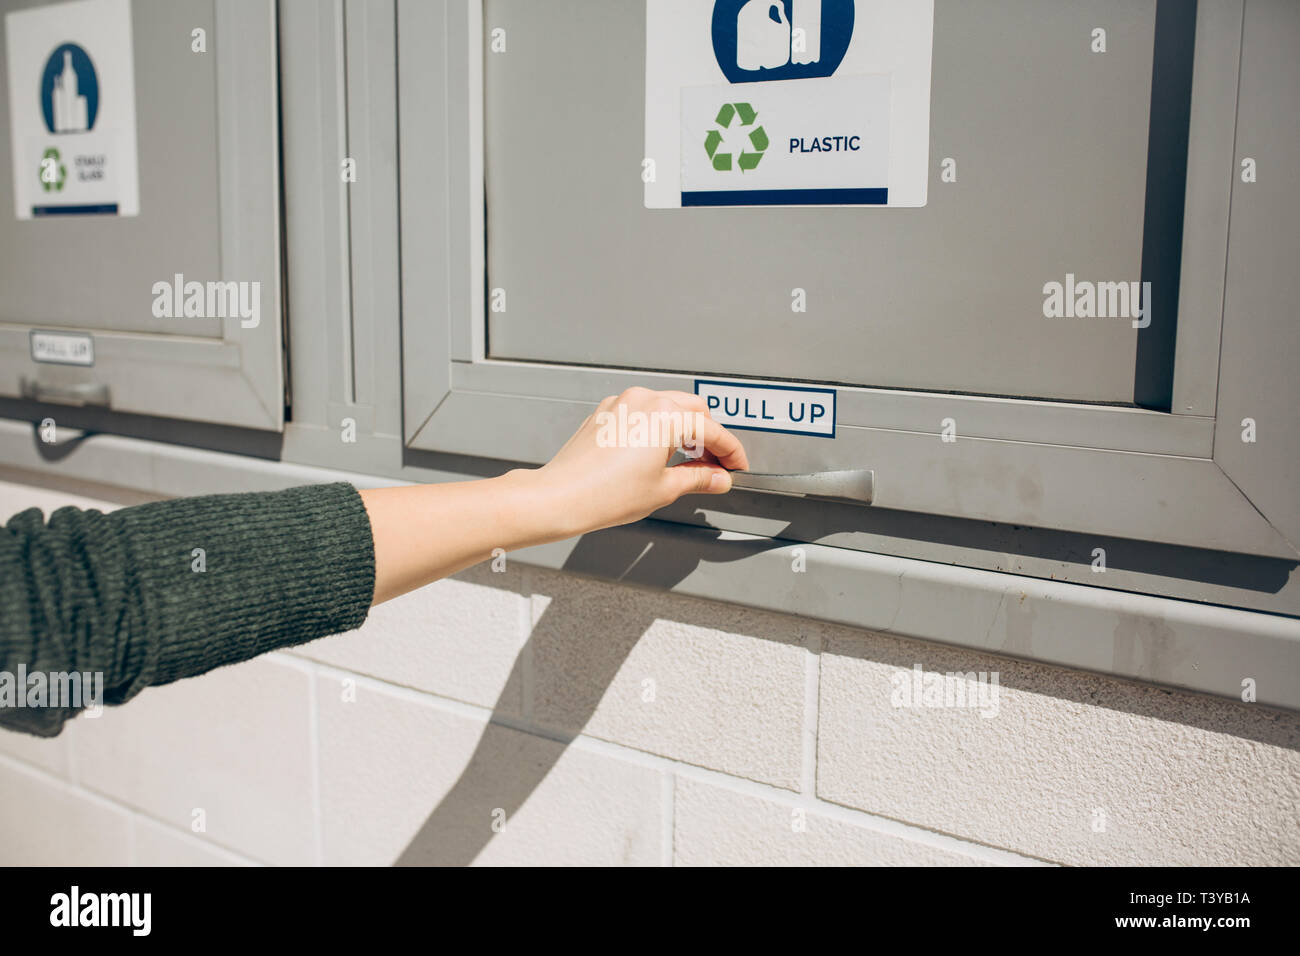 A person opens or closes a modern waste bin for separate collection of waste. Stock Photo